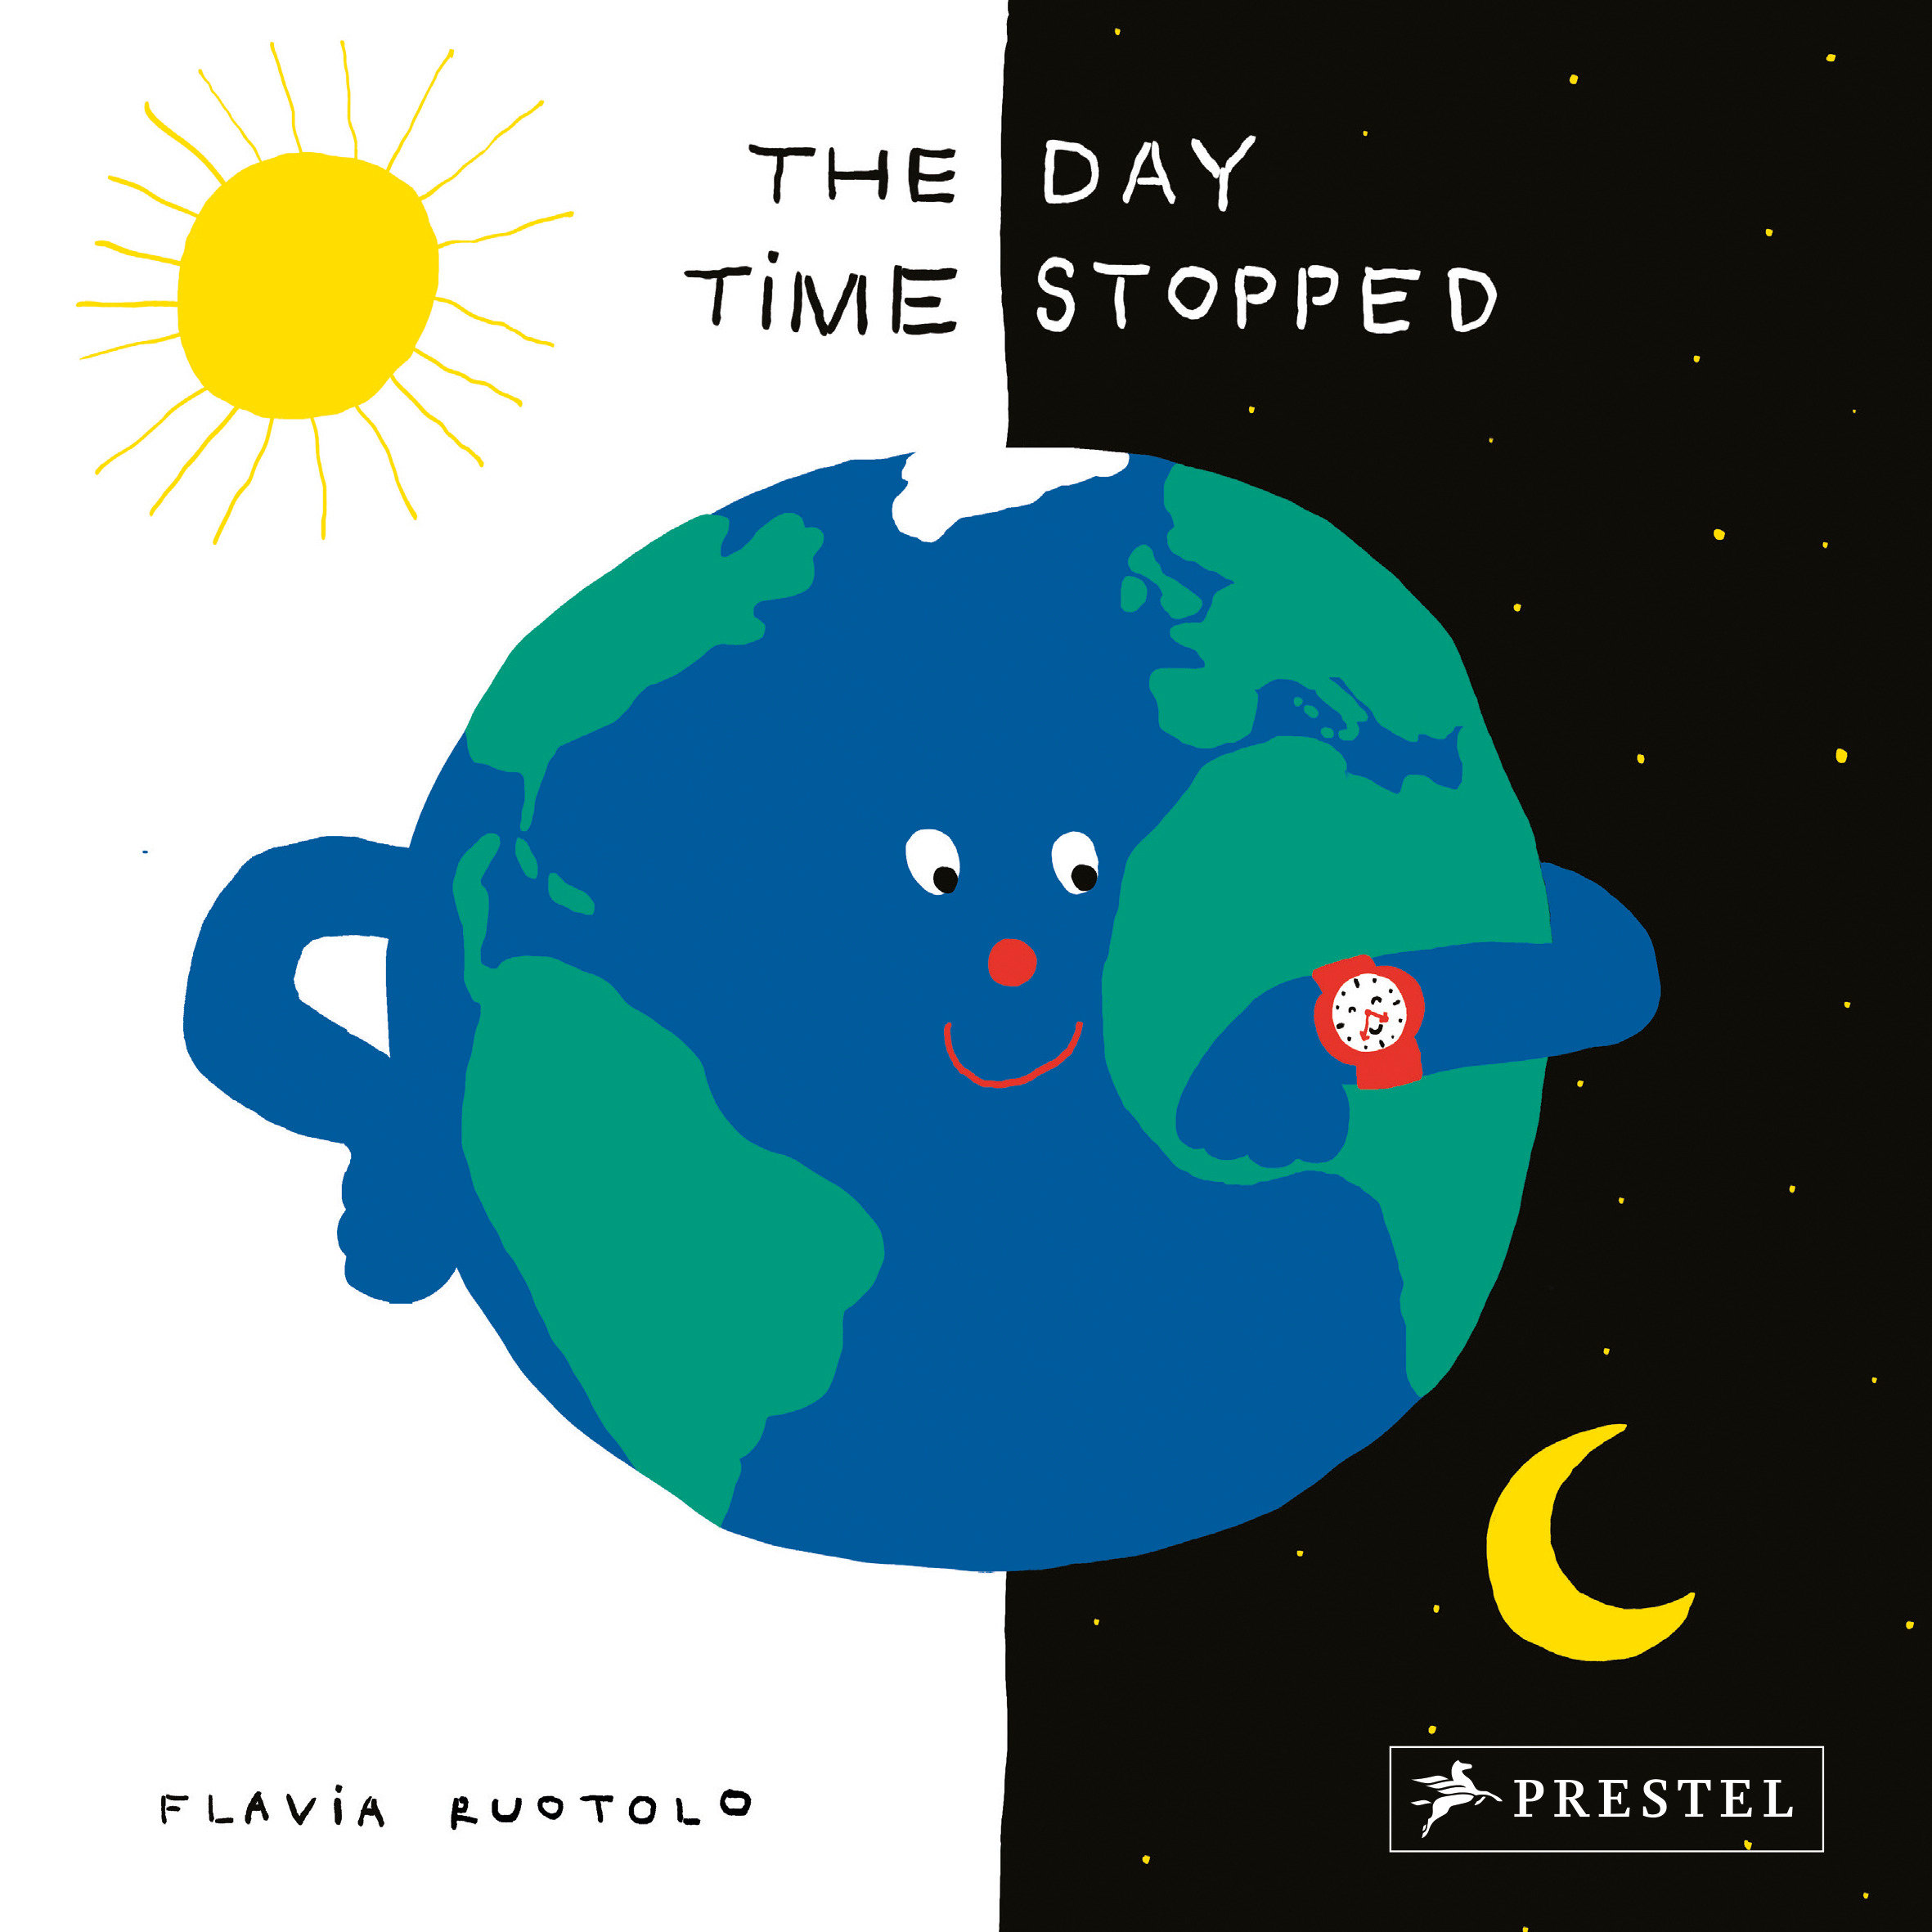 The Day Time Stopped (Hardcover Book)